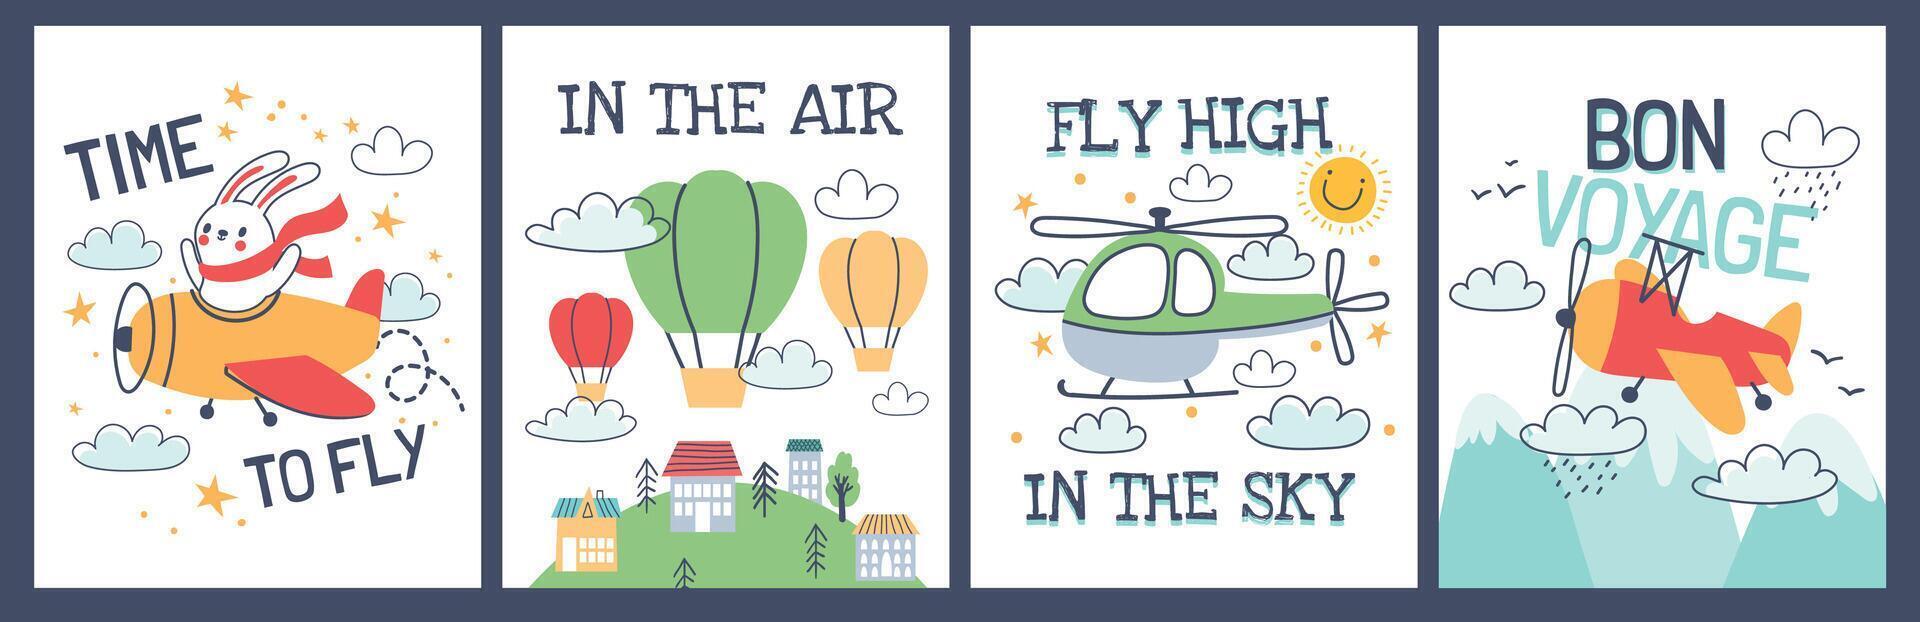 Cartoon baby t shirt prints with airplane and air balloons. Cute animal pilot in plane. Kid travel poster with aircraft transport vector set